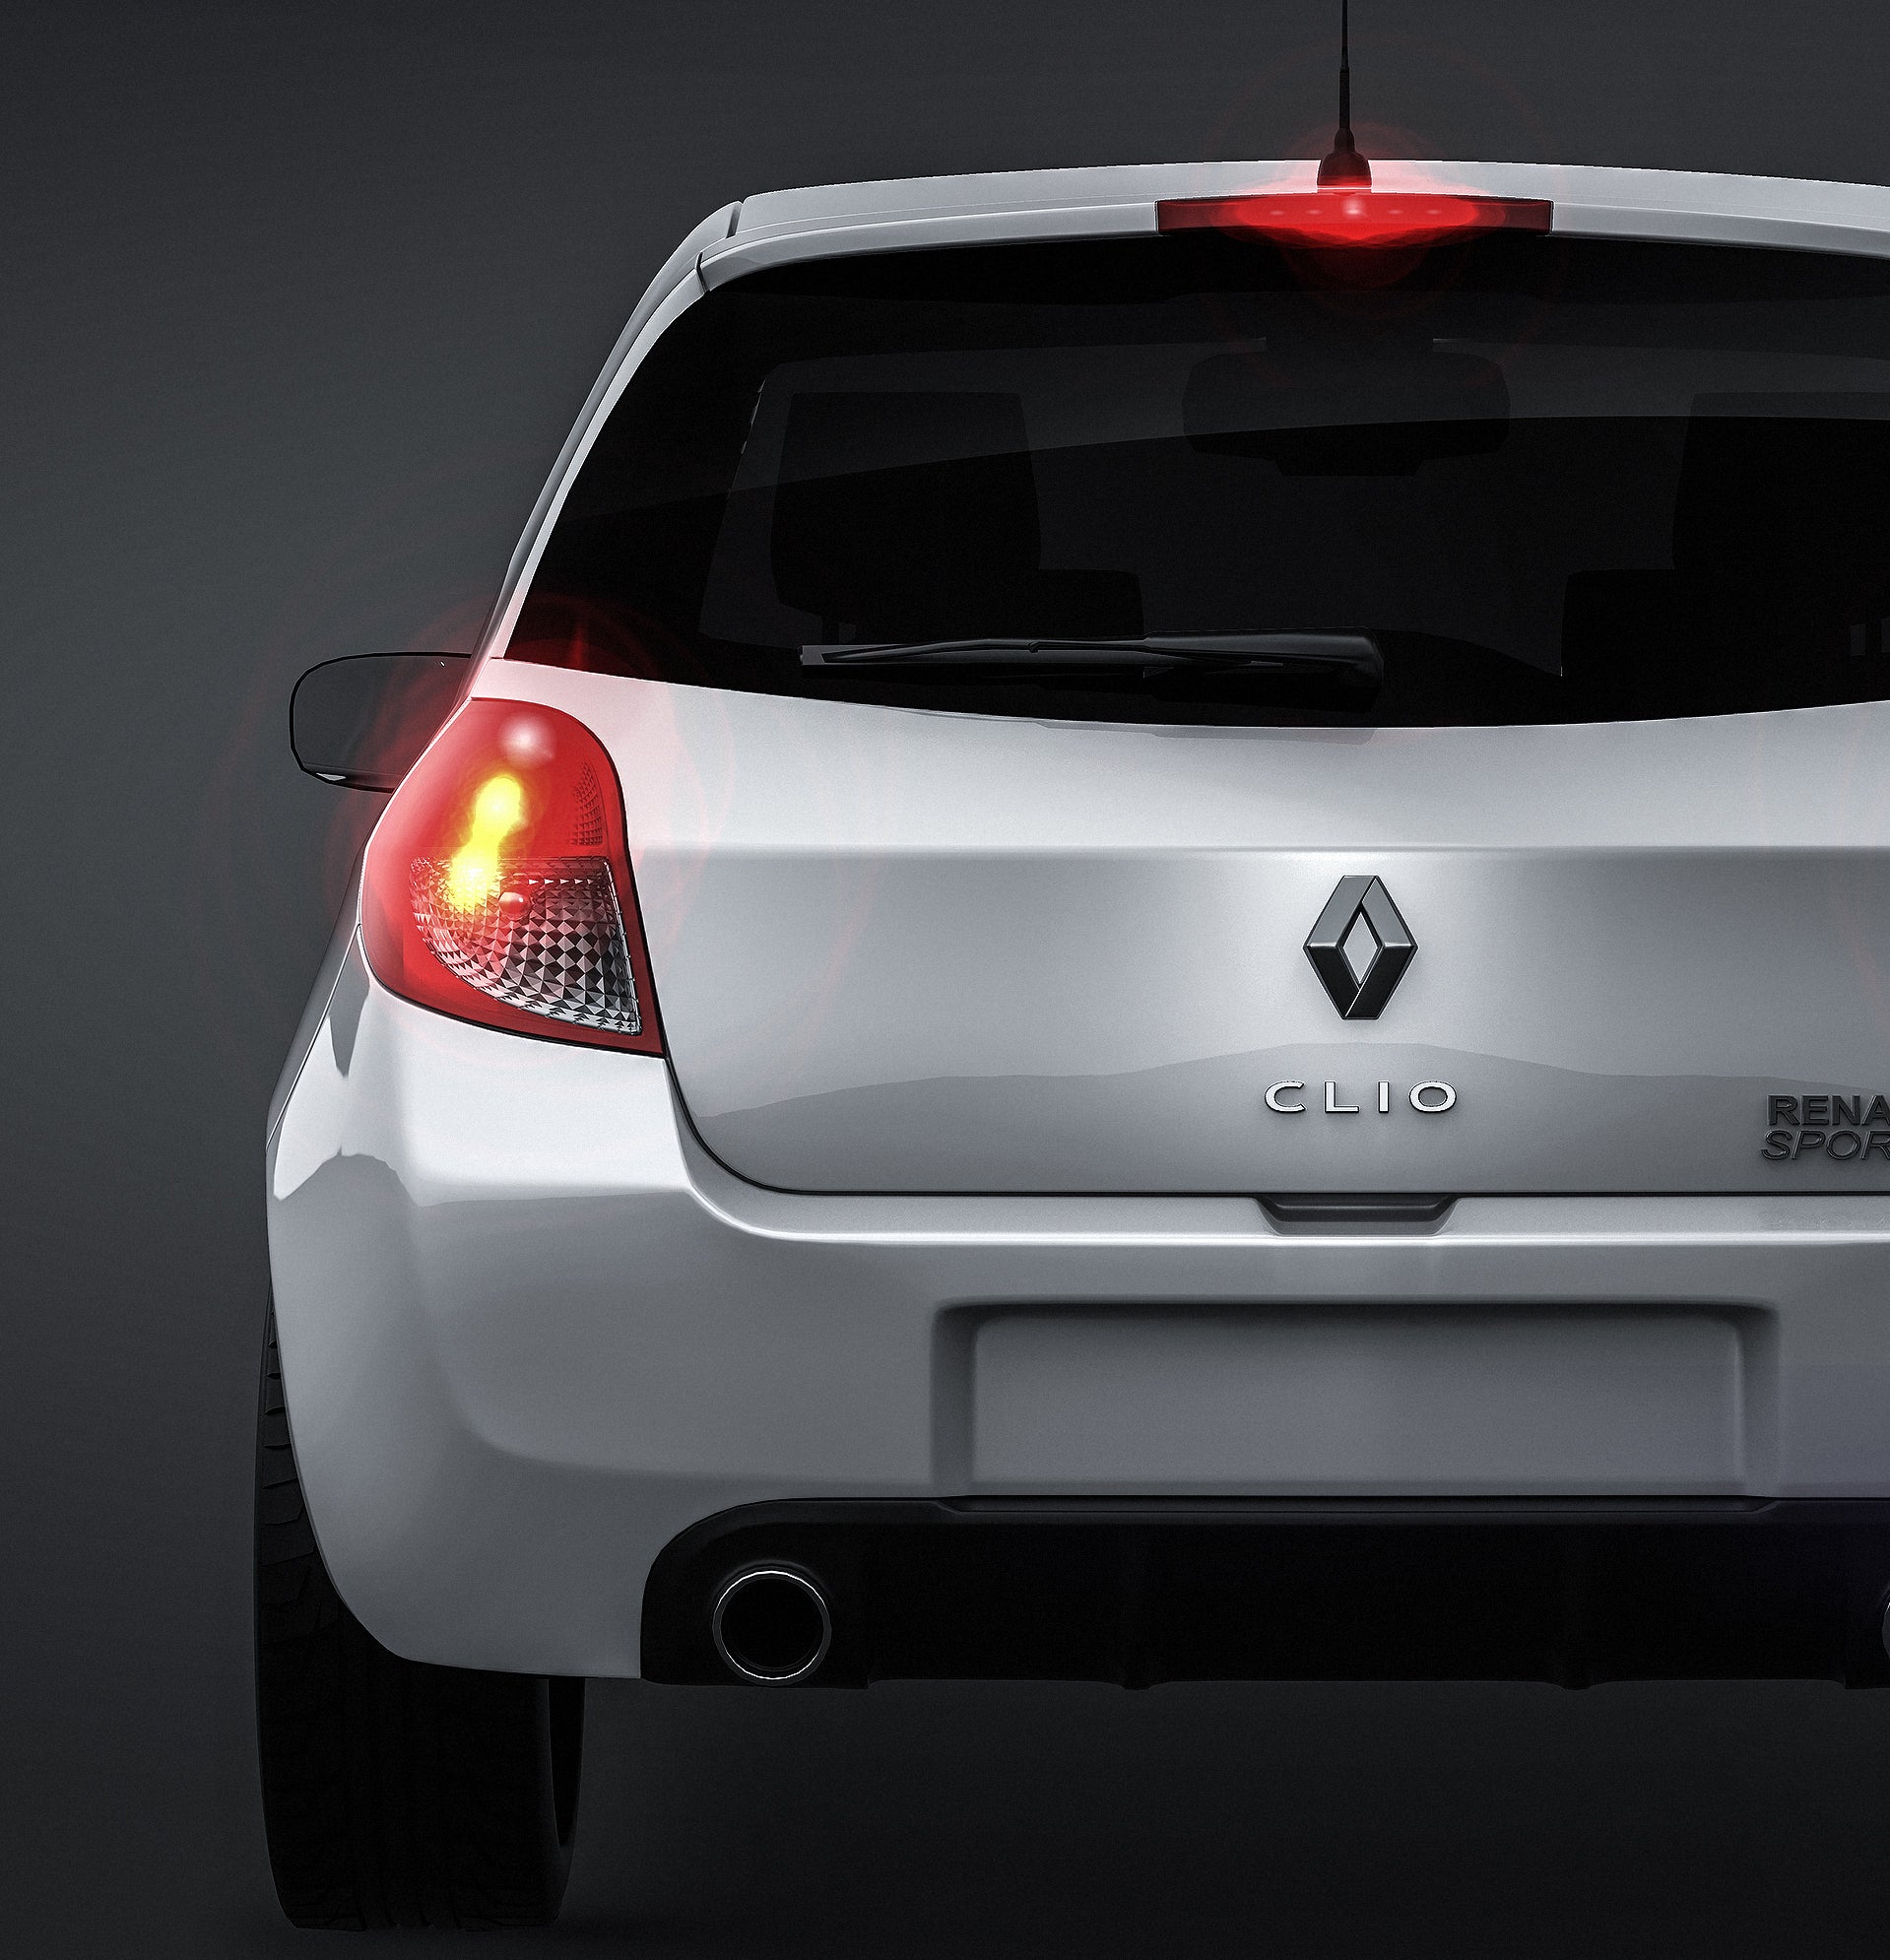 Renault Clio RS 2010 glossy finish - all sides Car Mockup Template.psd